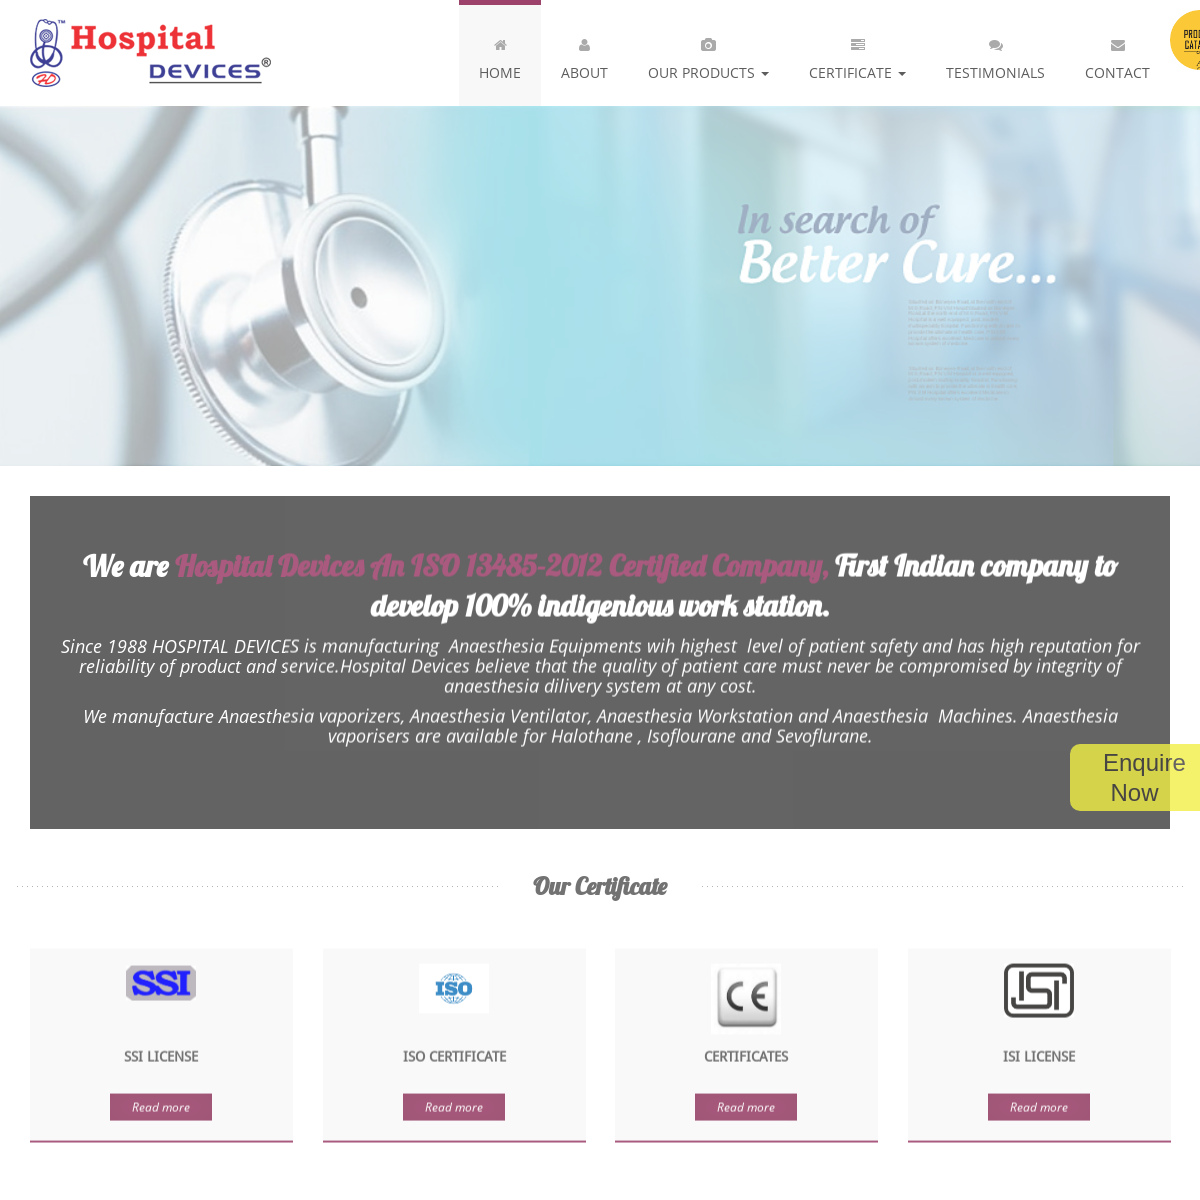 A complete backup of hospitaldevicesindia.com